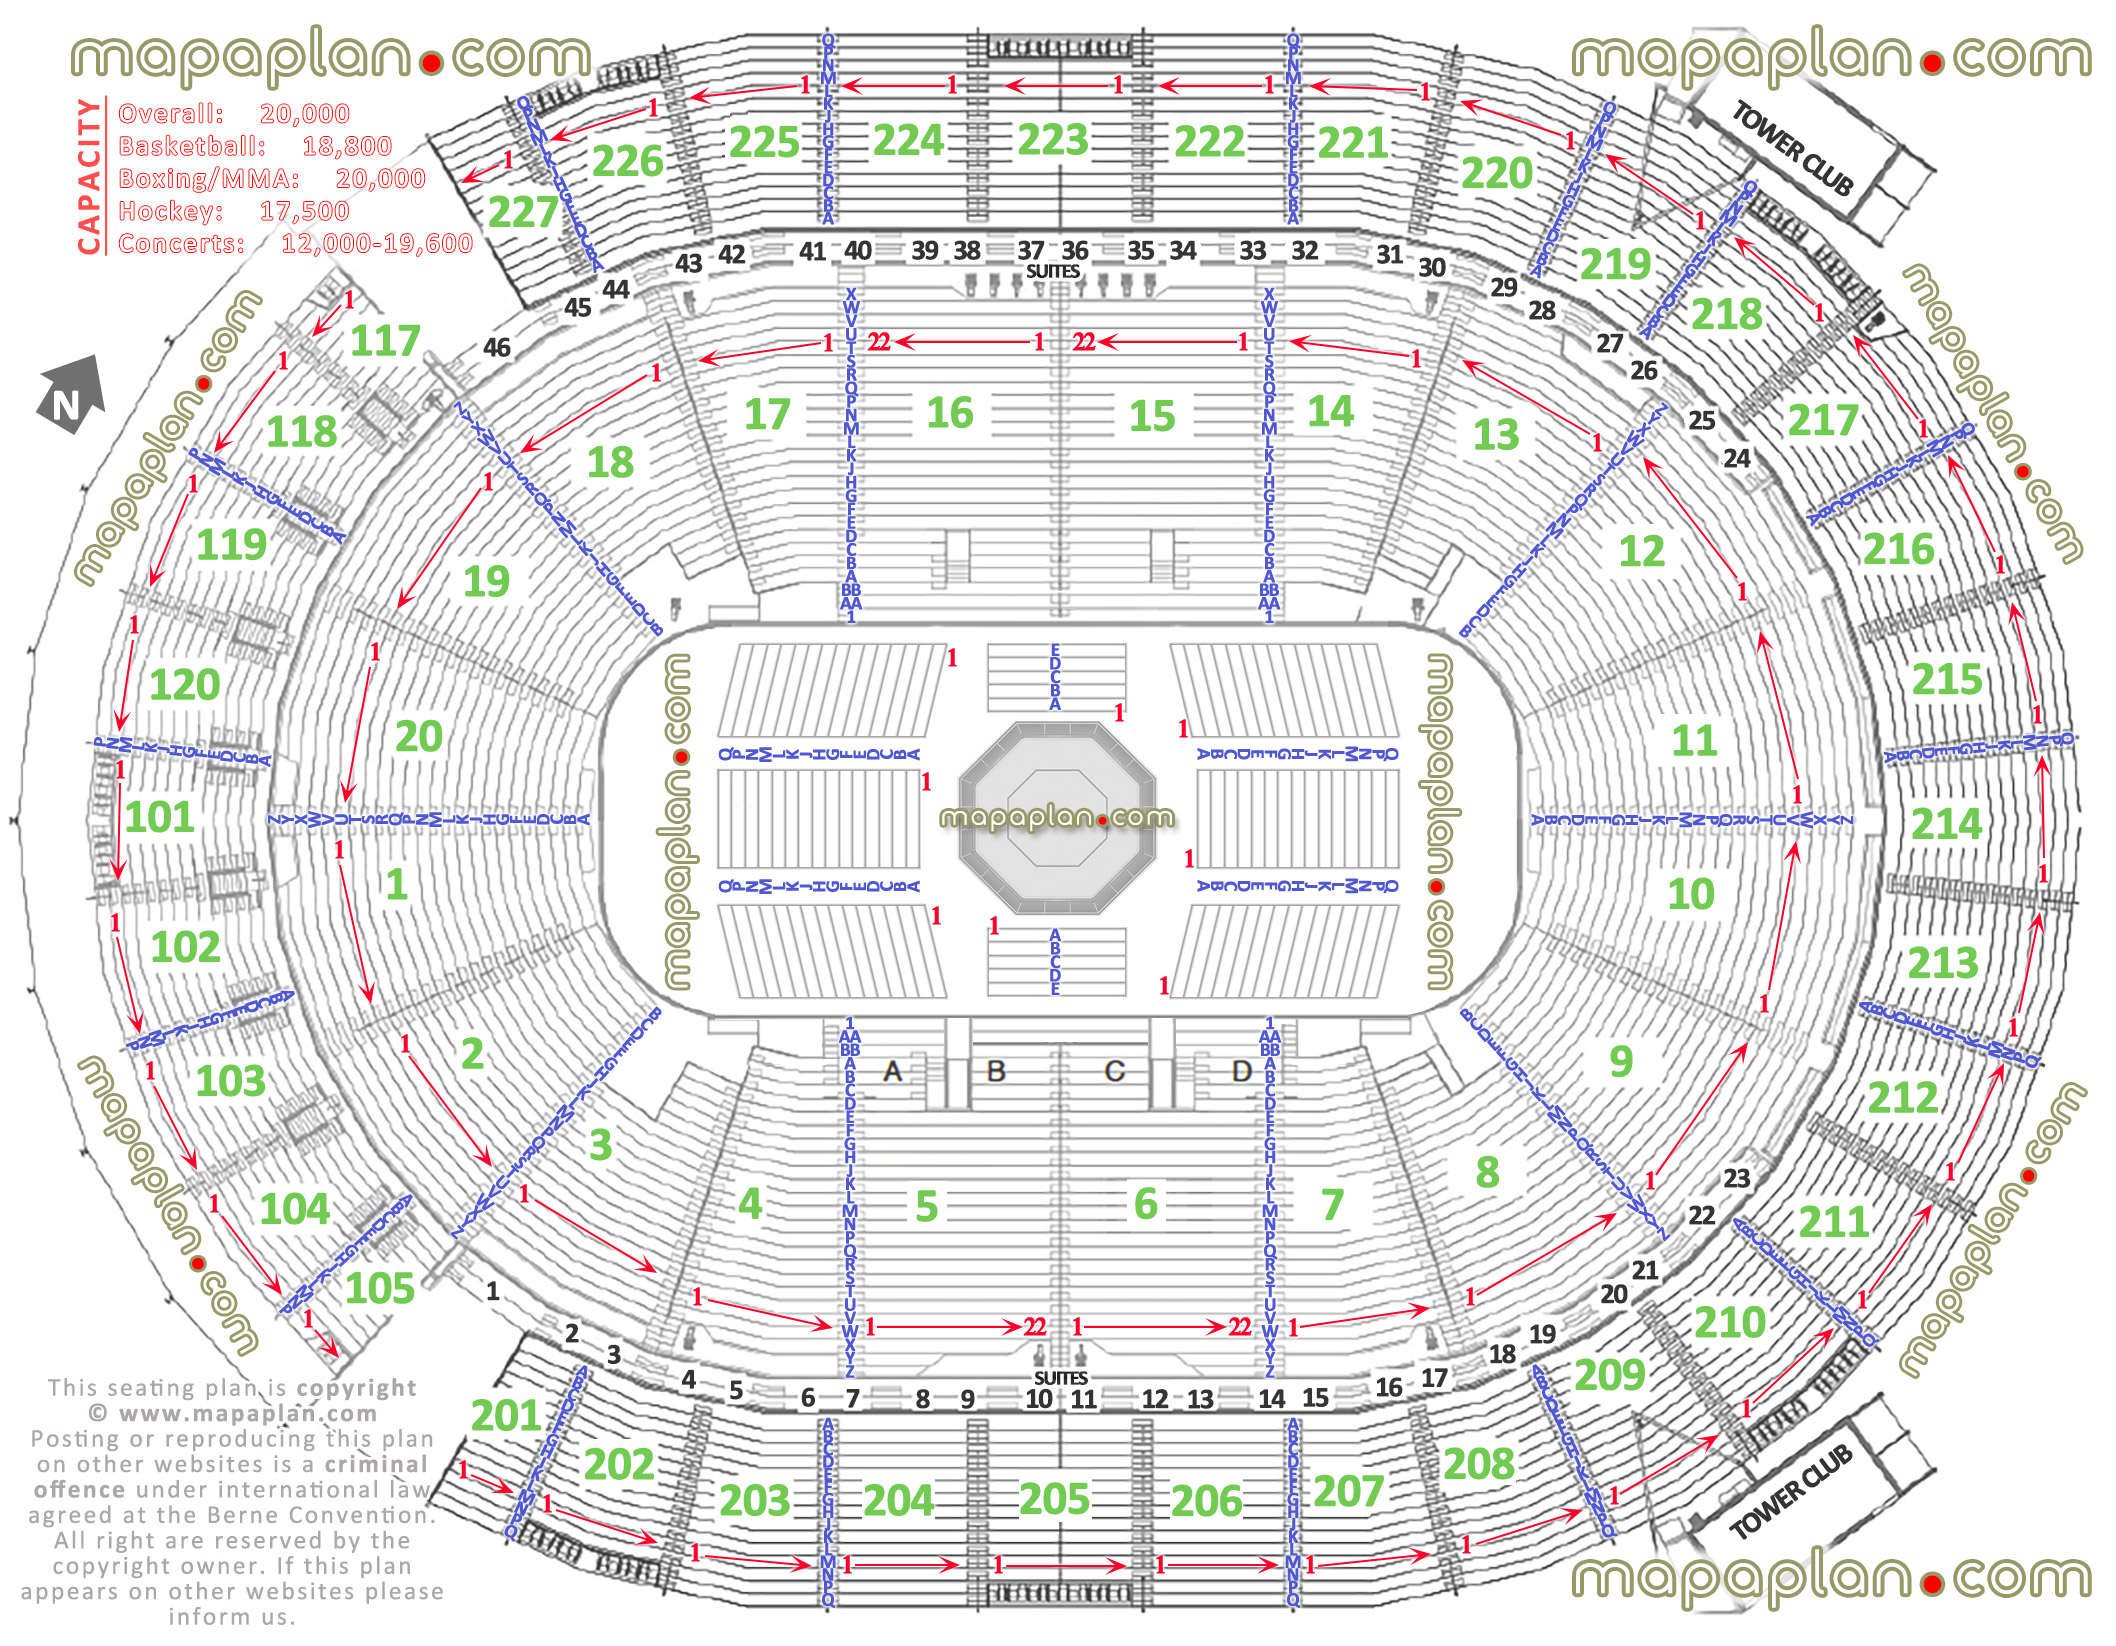 ufc 200 detailed seating chart row max seat capacity numbers rows each section detailed plan mma fights nevada lower suites upper tower club levels sections 1 2 3 4 5 6 7 8 9 10 11 12 13 14 15 16 17 18 19 20 Las Vegas New T-Mobile Arena MGM-AEG seating chart